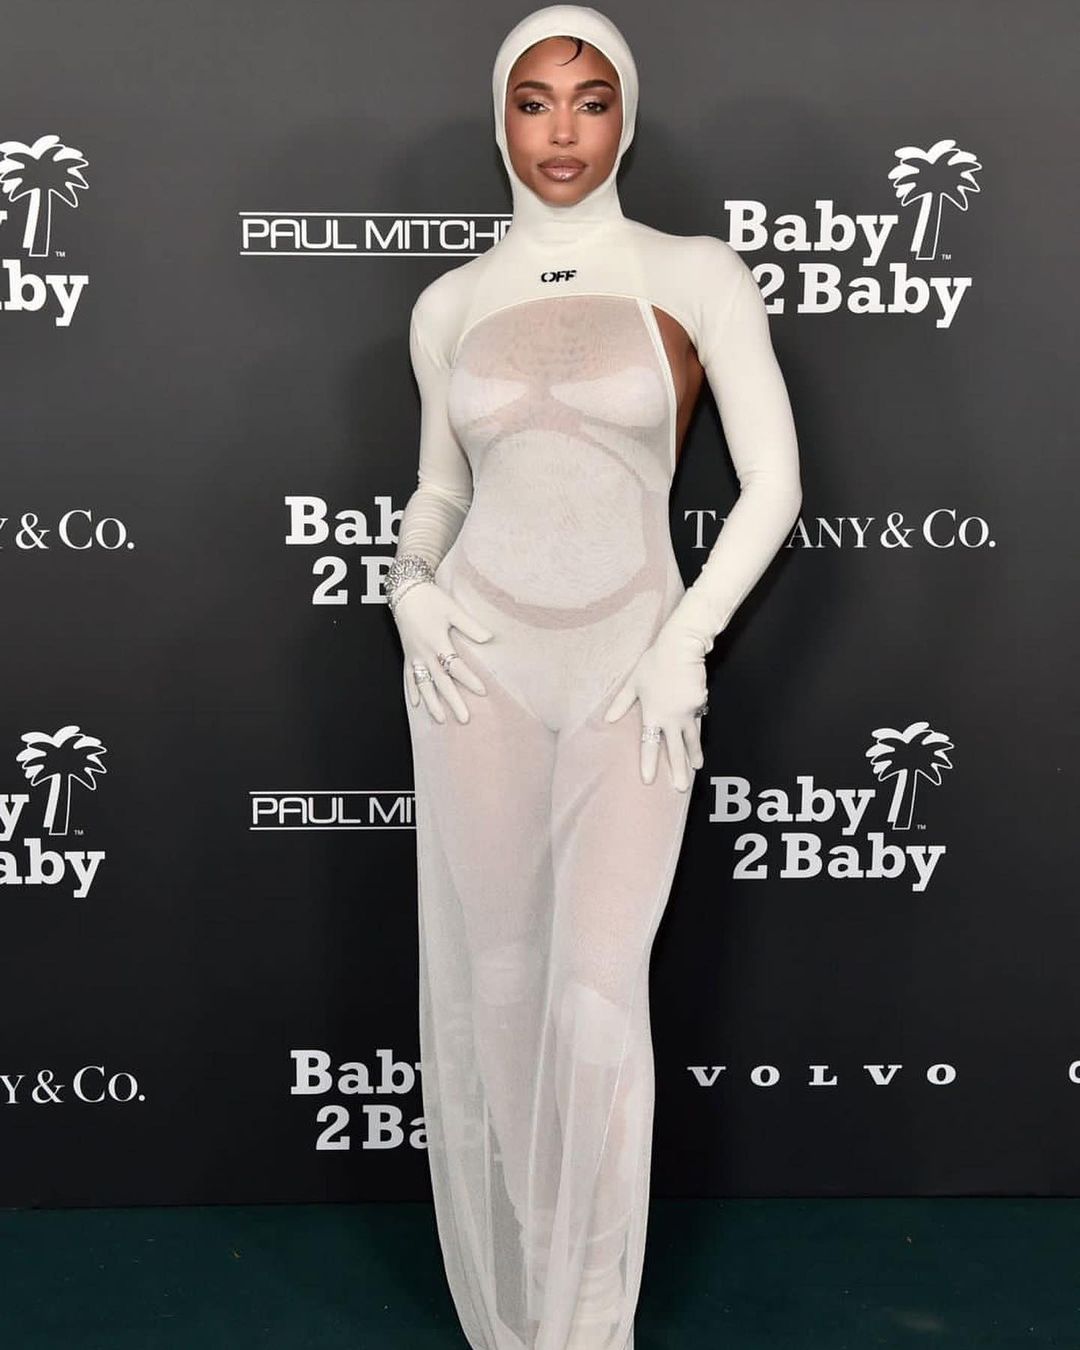 Top Looks at the Baby 2 Baby Gala Kim Kardashian in Pink Balenciaga Lori Harvey in Sheer Off White Kelly Rowland in Georges Chakra and More3